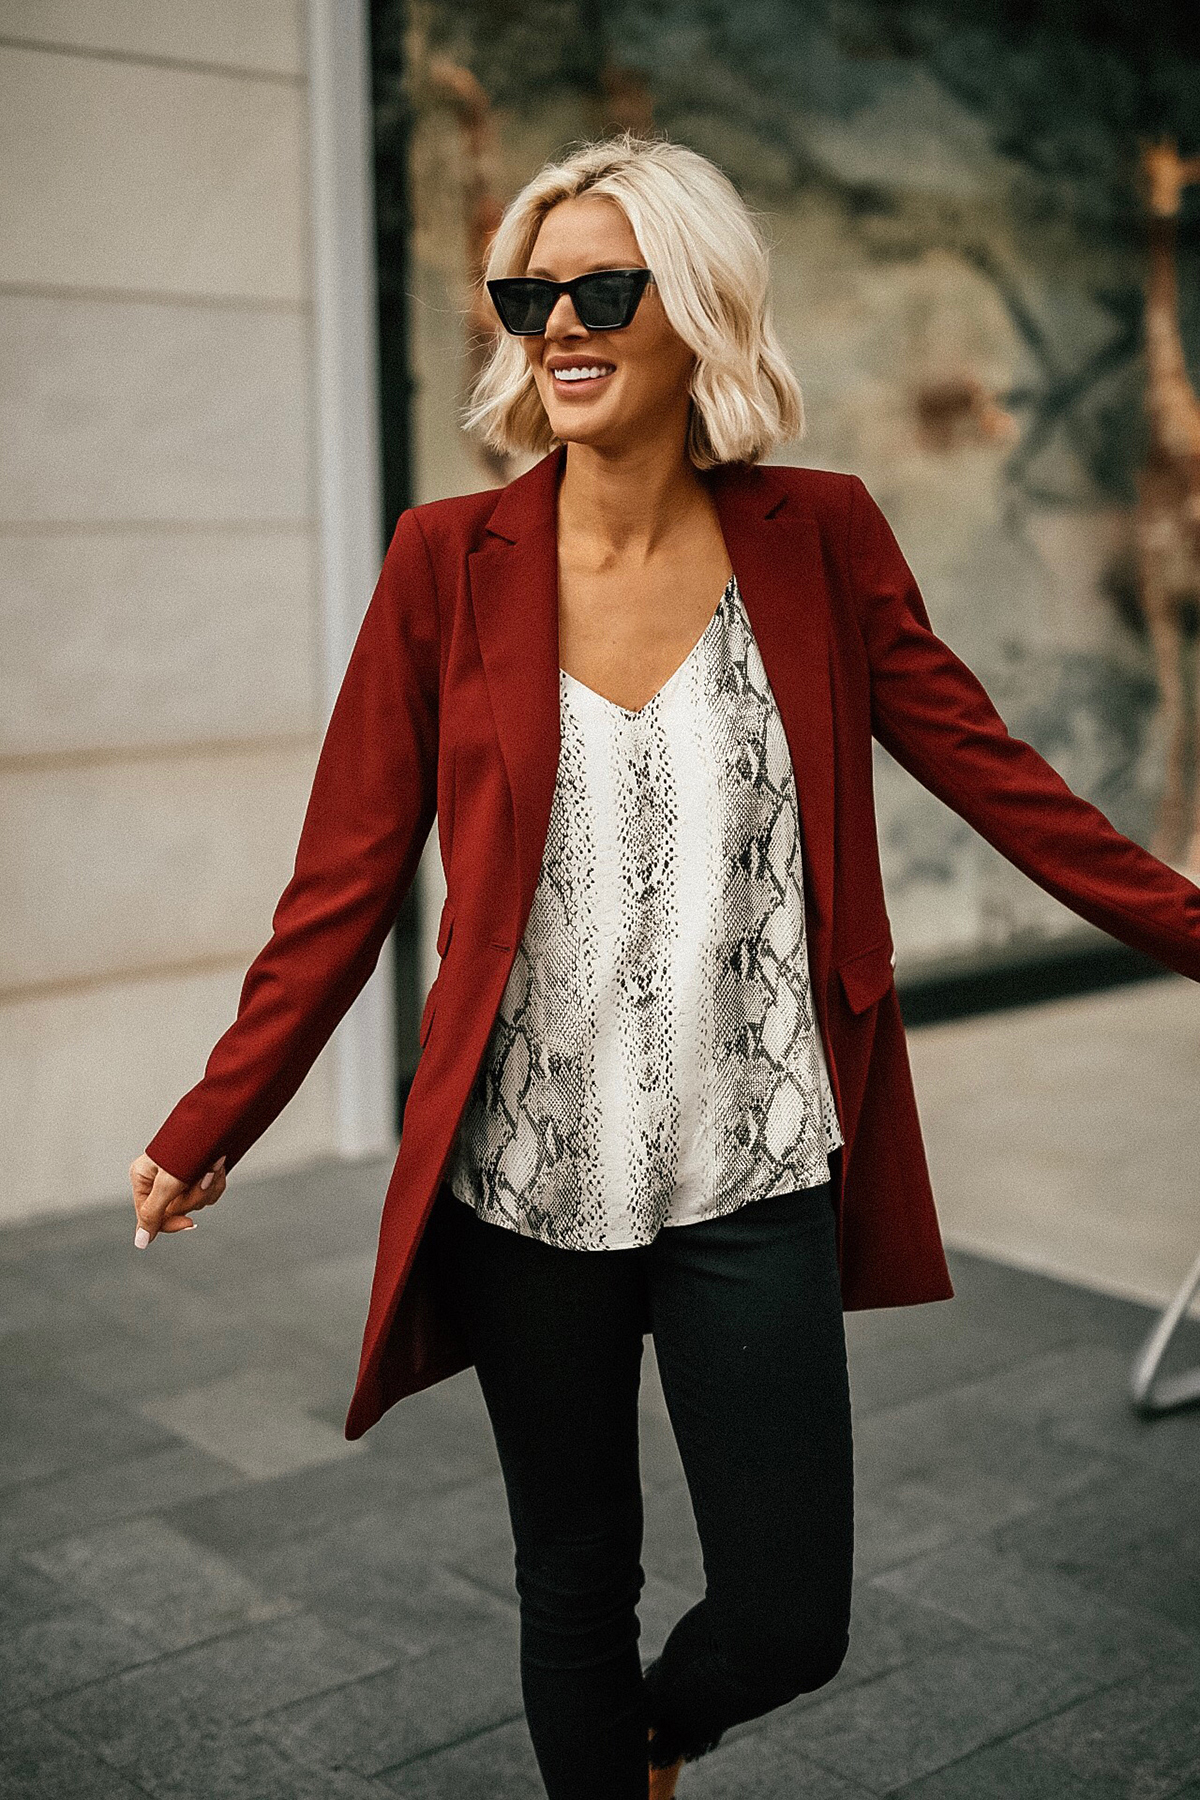 Sage Coralli of So Sage Blog updating her wardrobe for the New Year with Stitch Fix